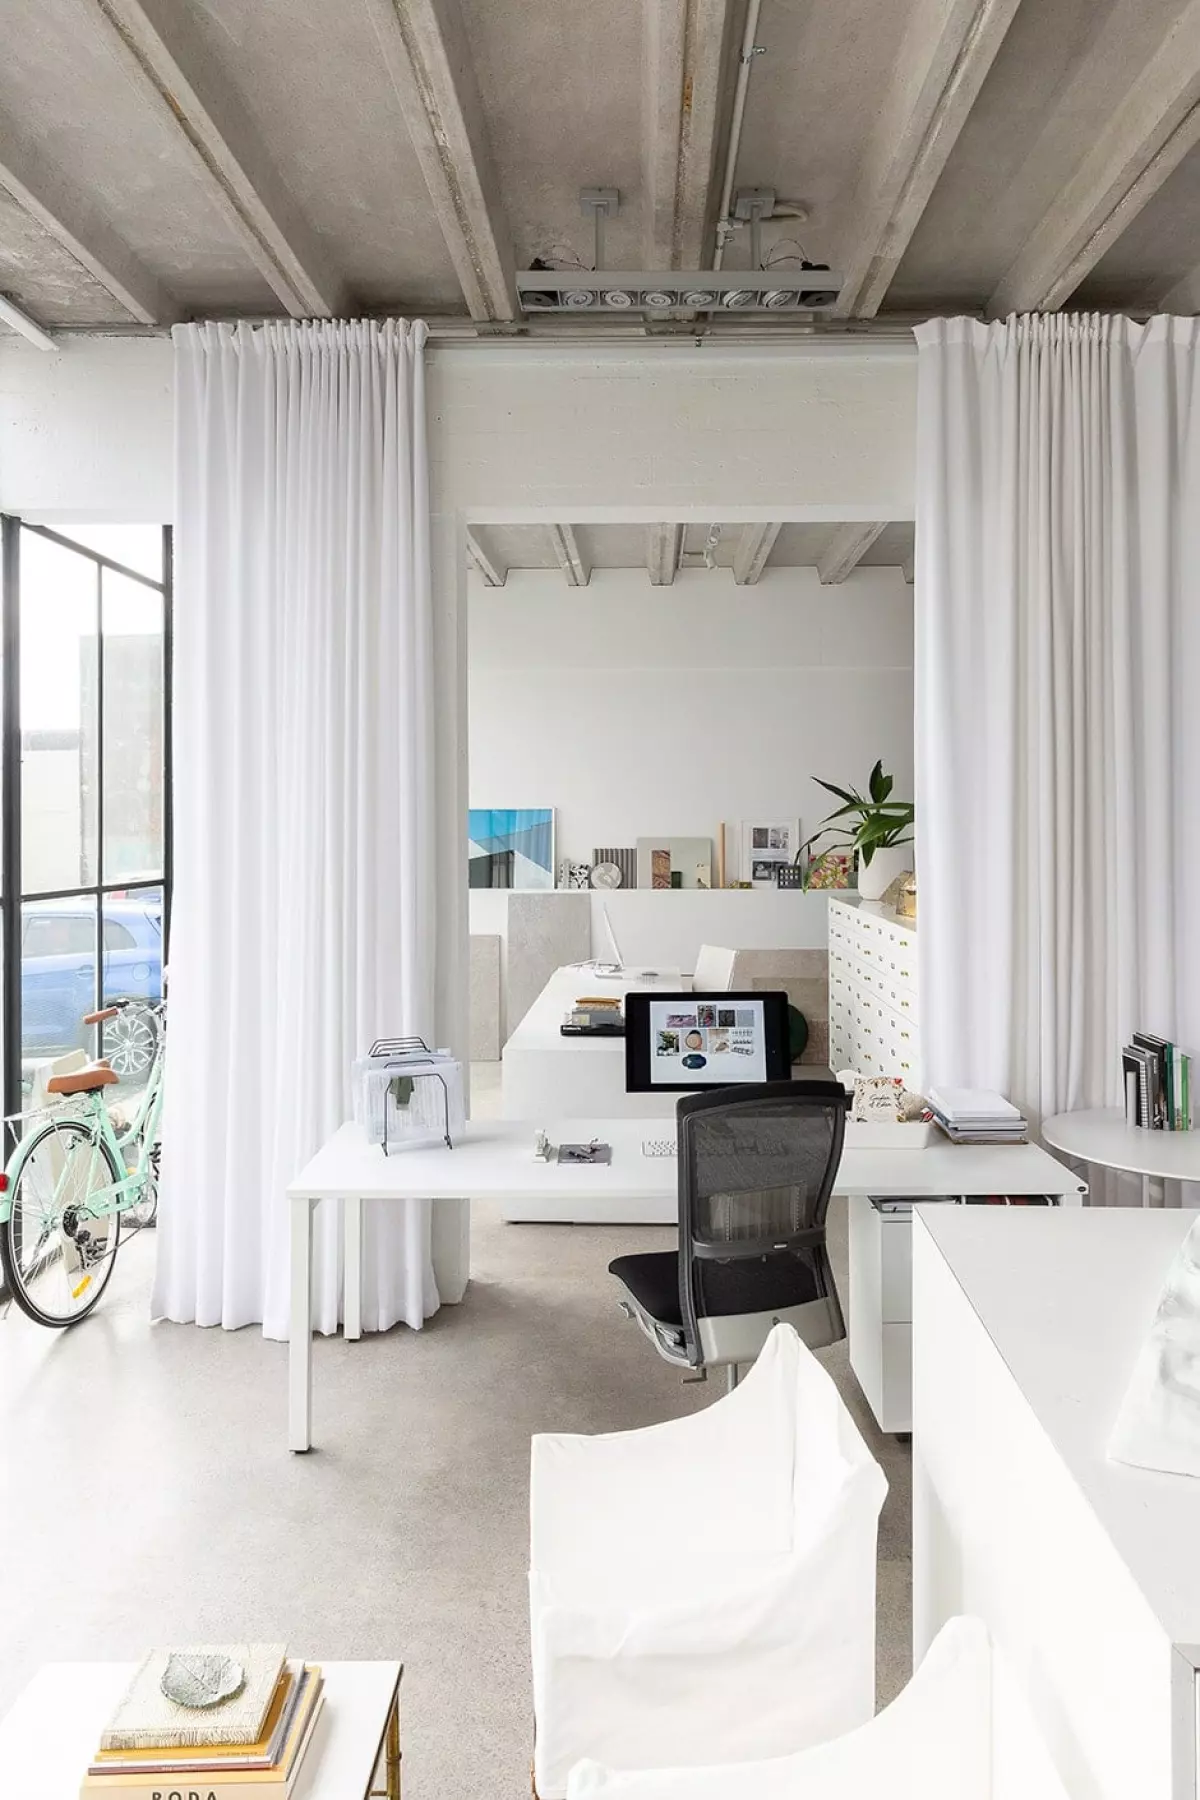 ABOVE This view into the drawing studio showcases the white palette and simple textures that provide a blank canvas for the JKW team’s work. A picture ledge at the rear of the room puts suppliers’ latest and greatest on display.